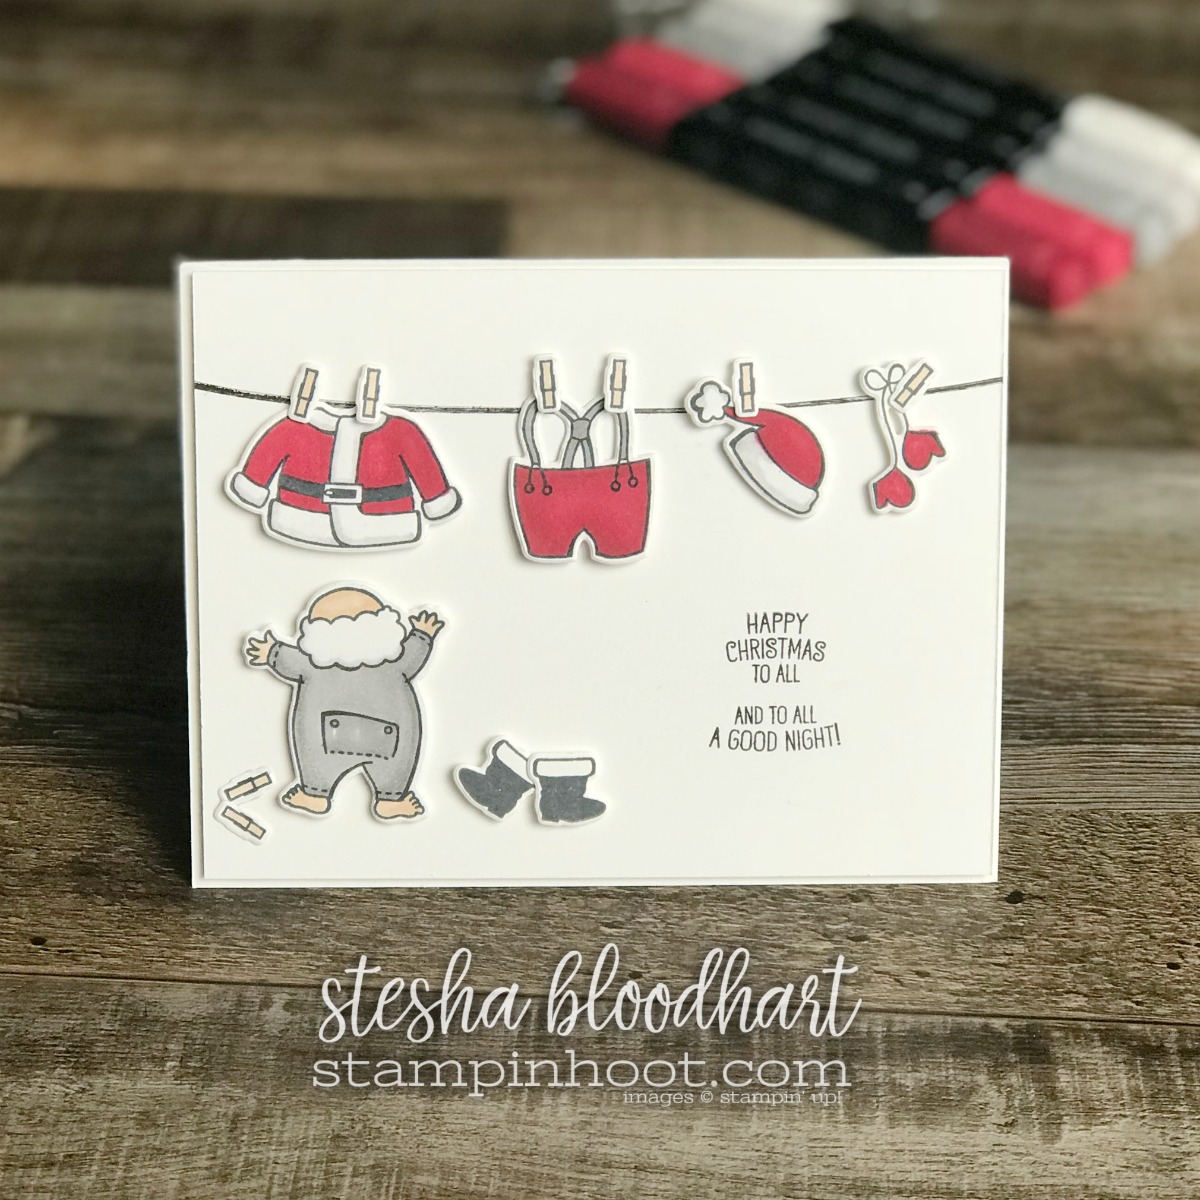 Santa's Suit Photopolymer Bundle by Stampin' Up! Retiring 2017 Holiday Catalog January 2, 2018 Card Created for TGIFC Last Minute Santa by Stesha Bloodhart, Stampin' Hoot! #tgifc139 #steshabloodhart #stampinhoot